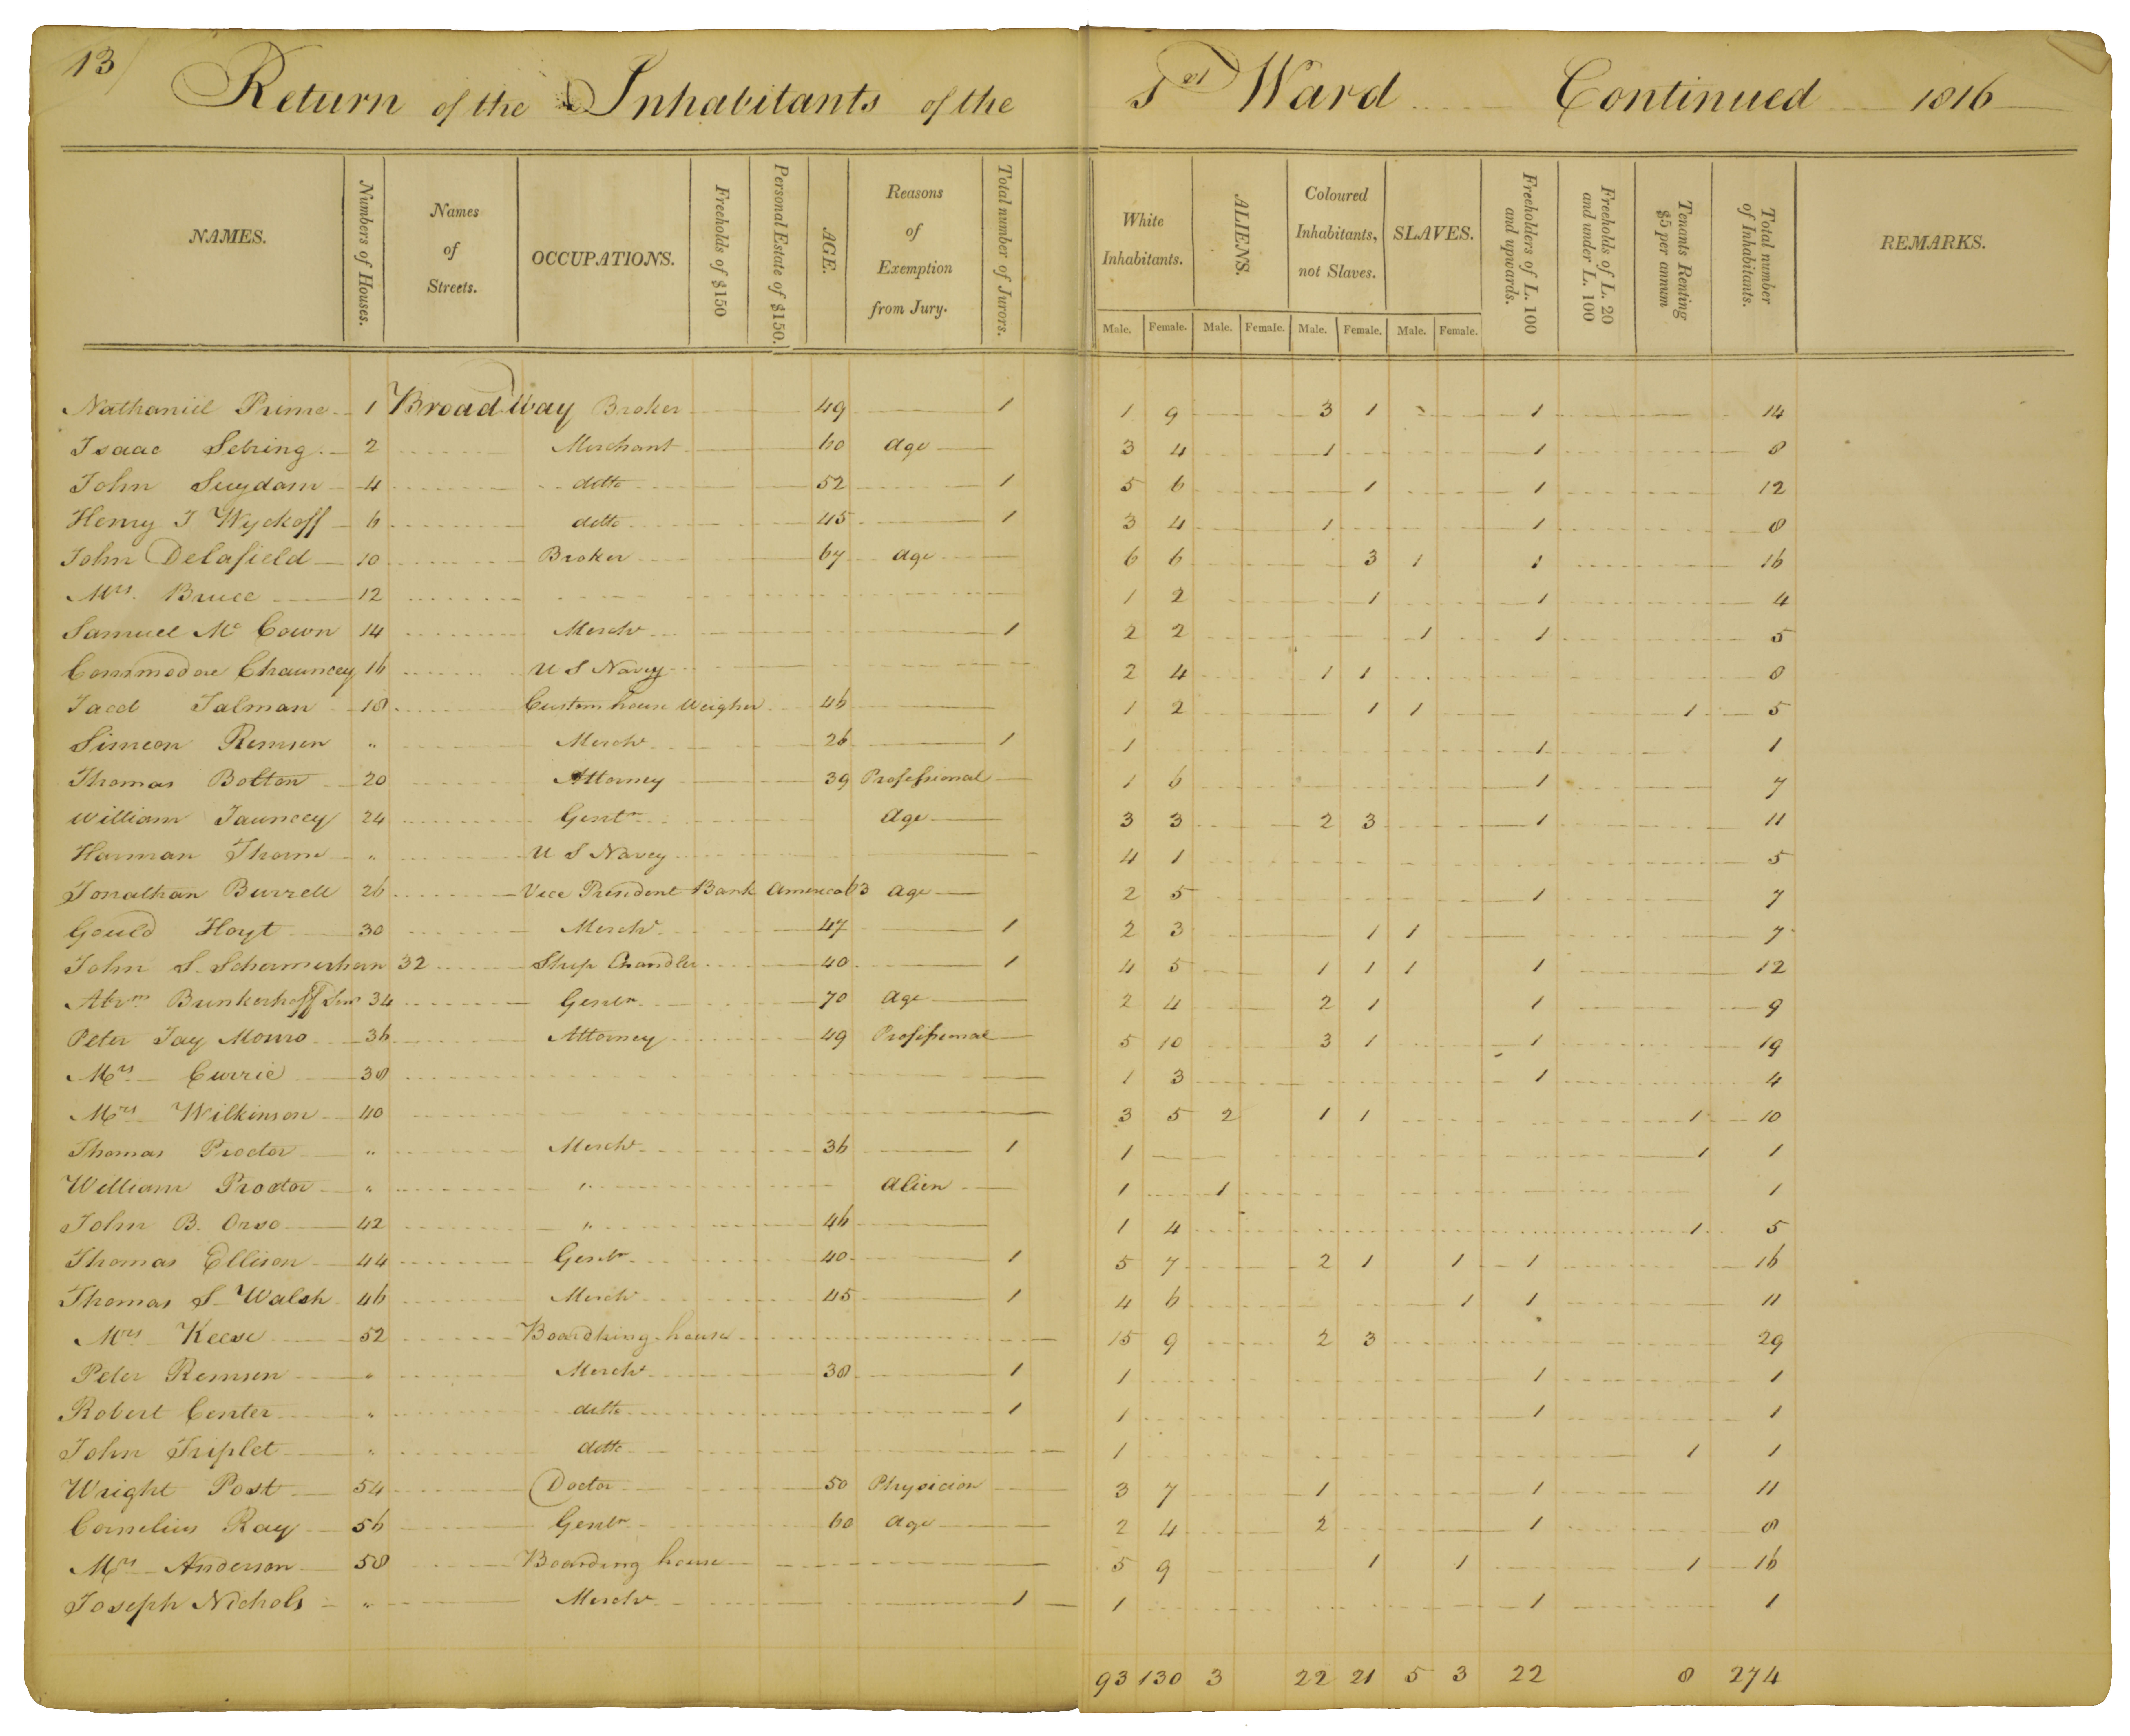 2nd Image of census